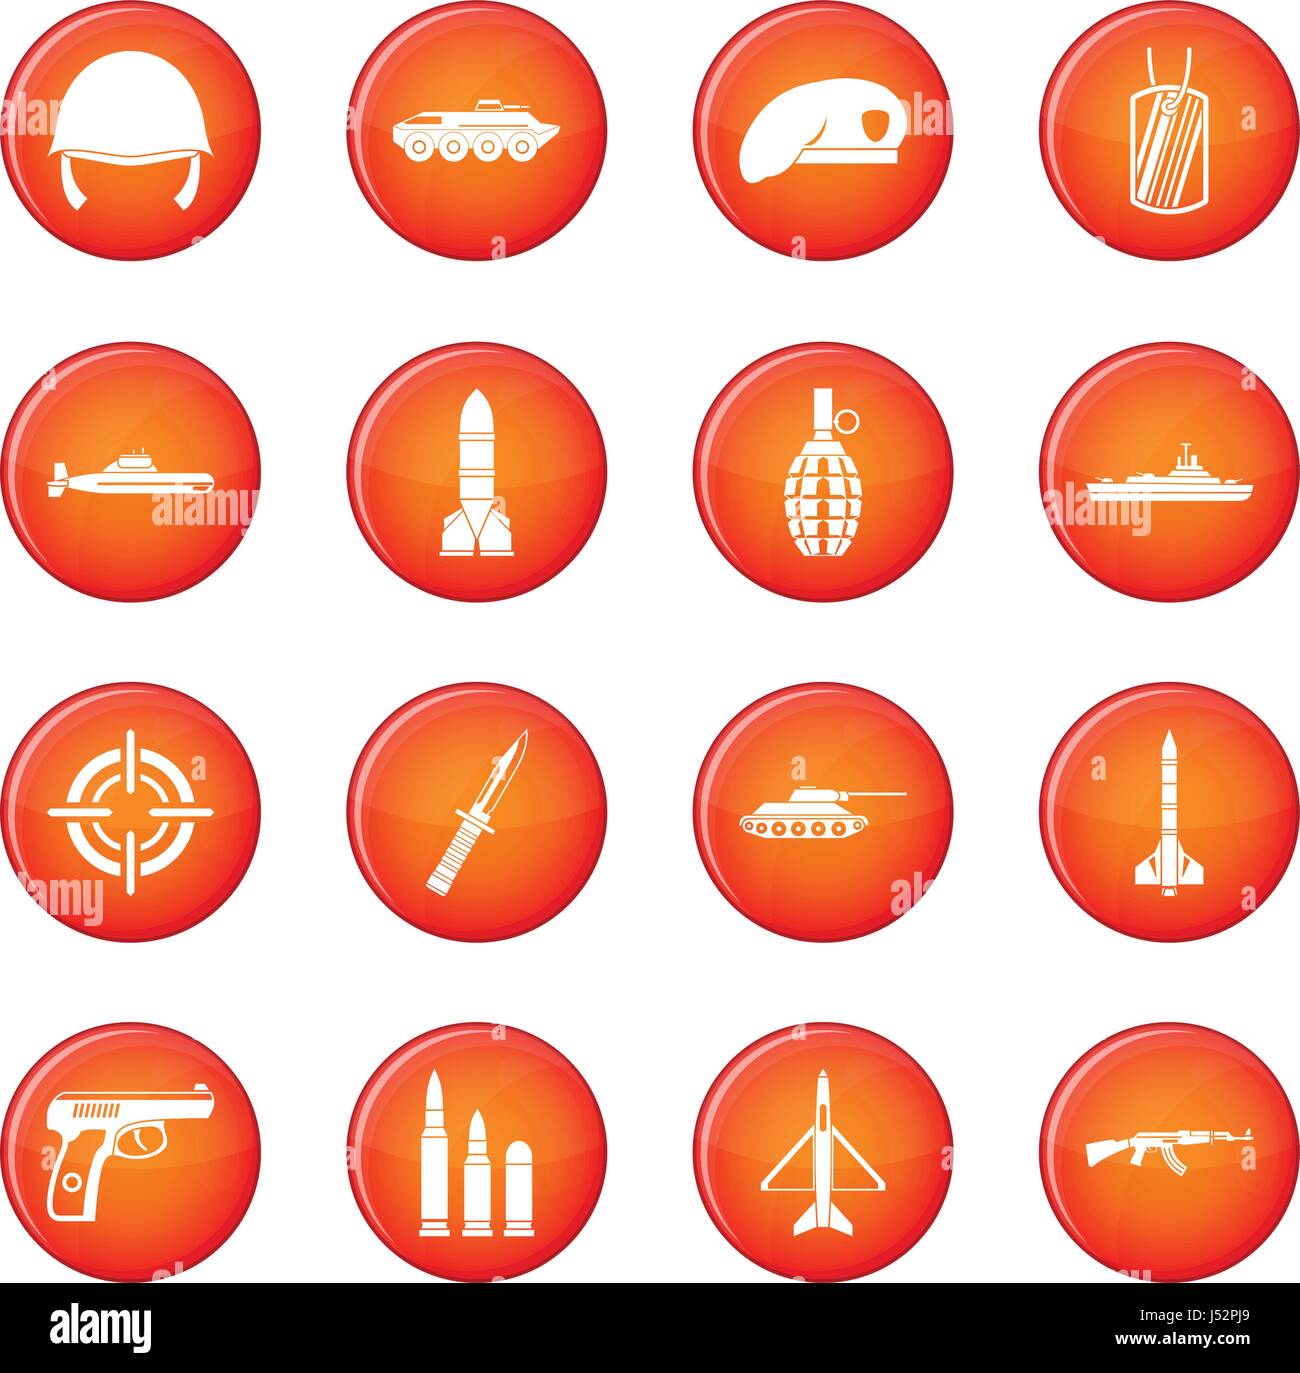 Military icons vector set Stock Vector